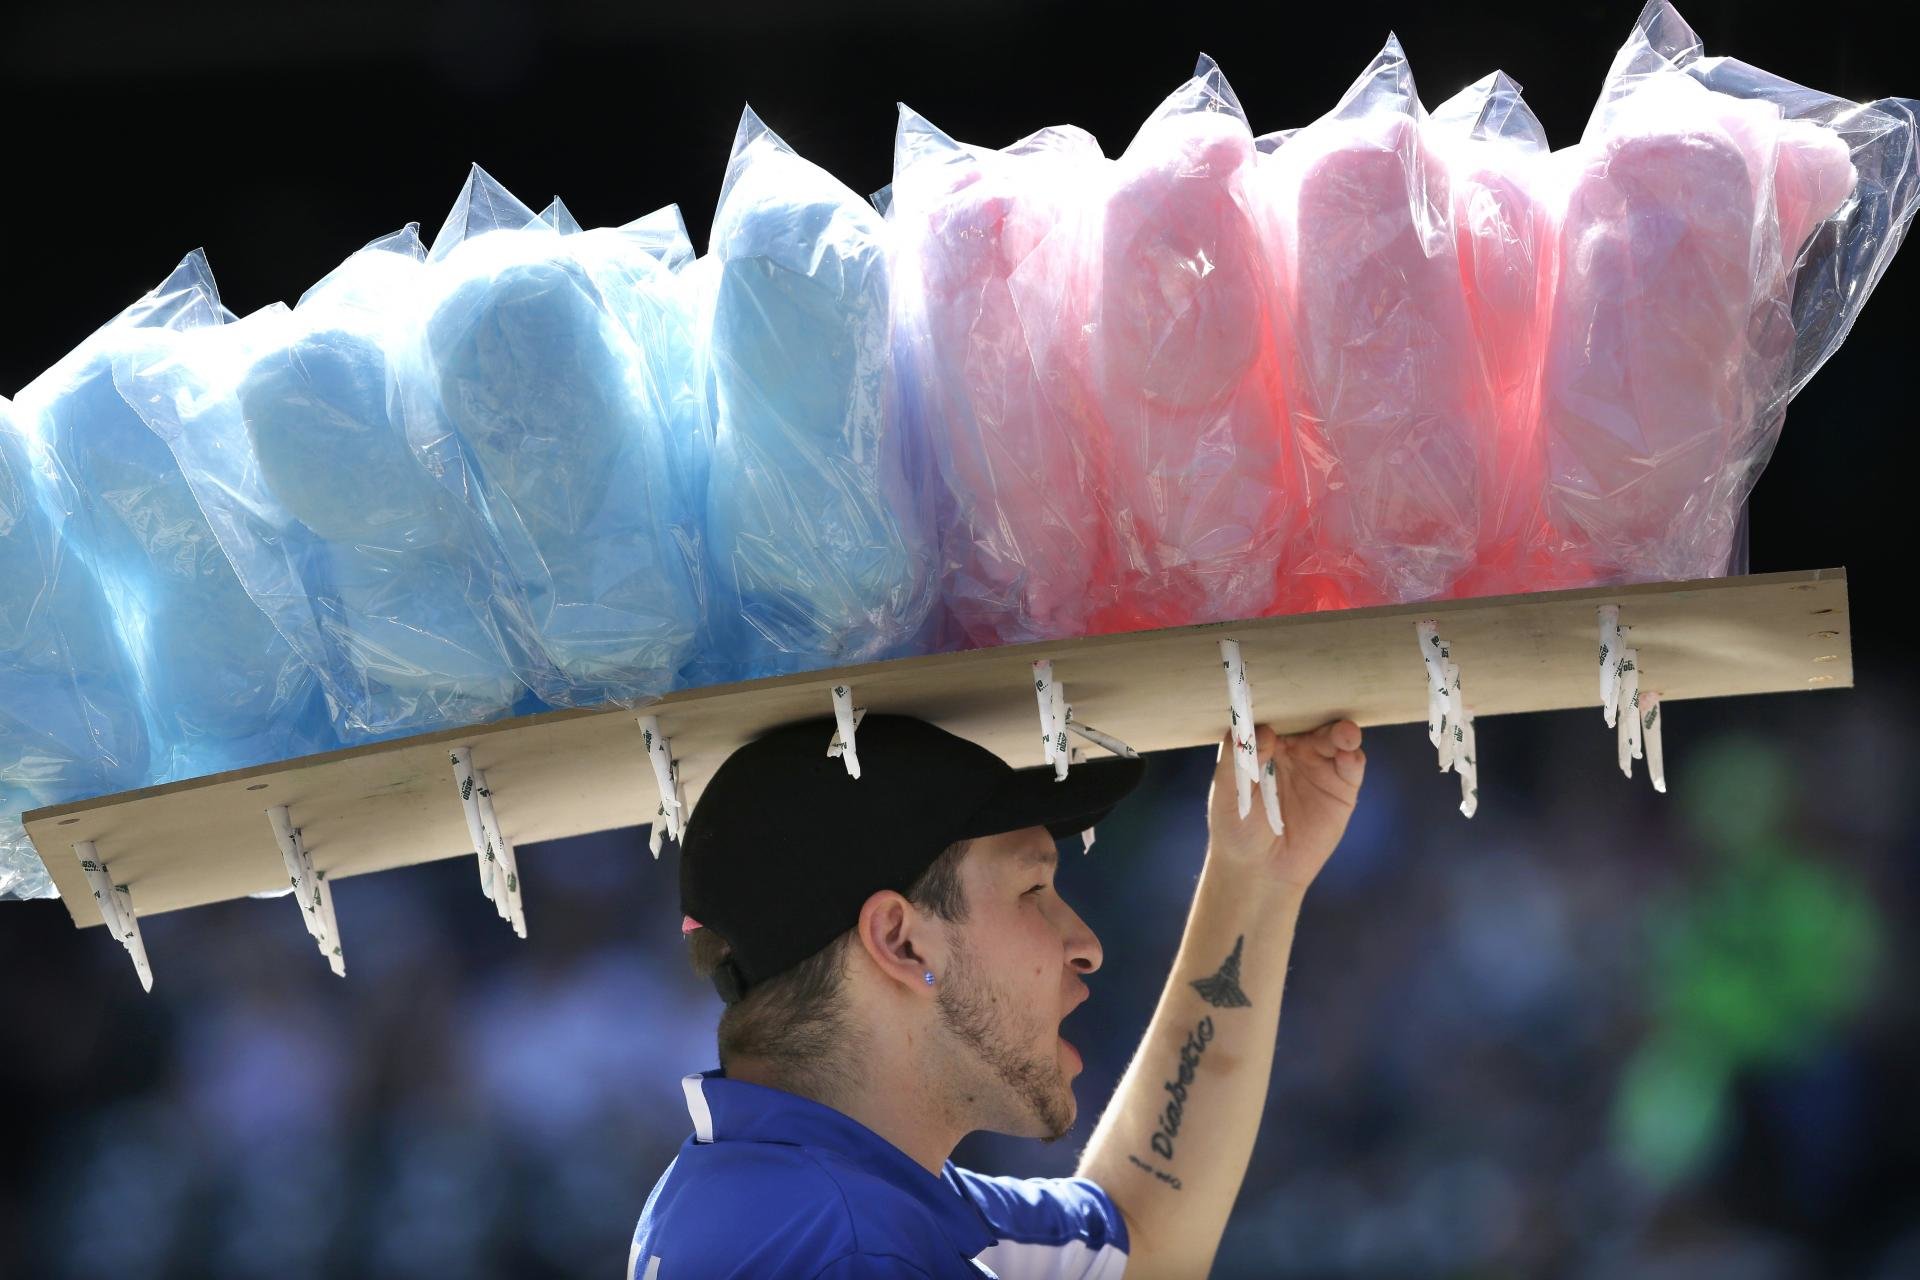 Download Hd Cotton Candy Pc Wallpaper Id - Cotton Candy At Baseball Games , HD Wallpaper & Backgrounds